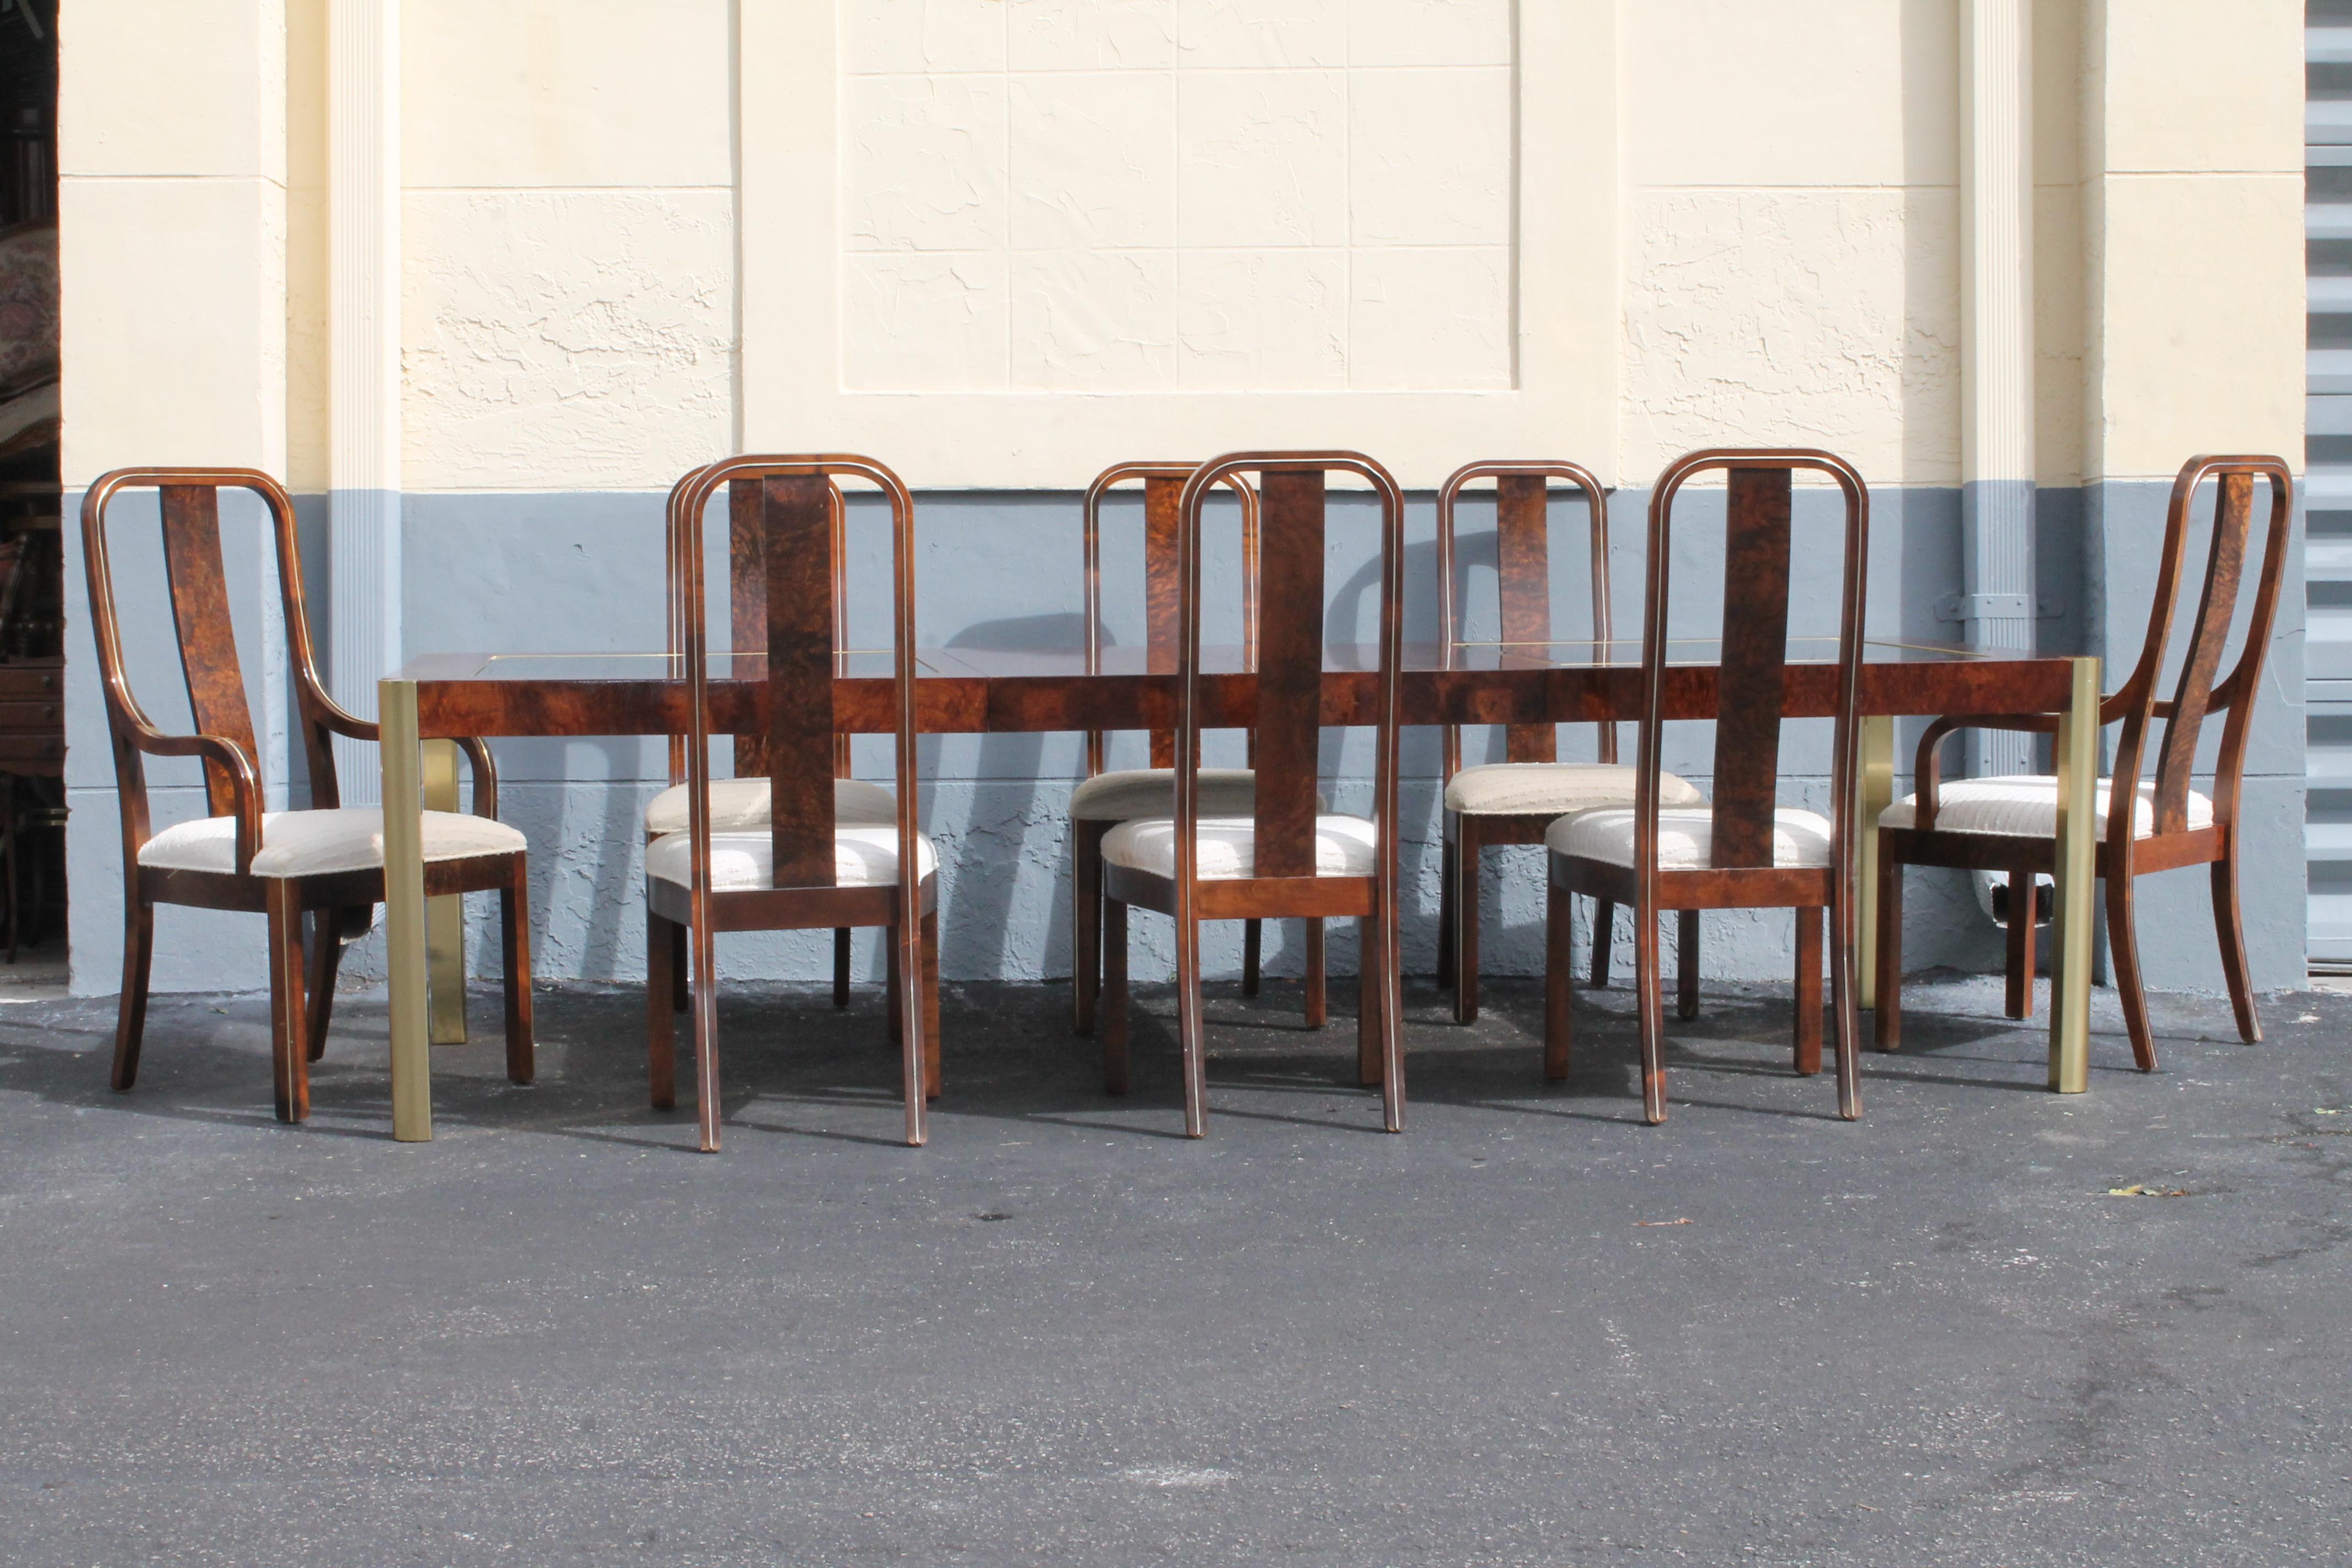 1970's Ultra Modern 11 Piece Dining Set by Century Furniture. Exotic Burlwood with bevelled bronze toned glass top. 8 chairs, stunning bent burlwood design. 2 armchairs and 6 side chairs, bronze glass inserts on top of brass toned burlwood